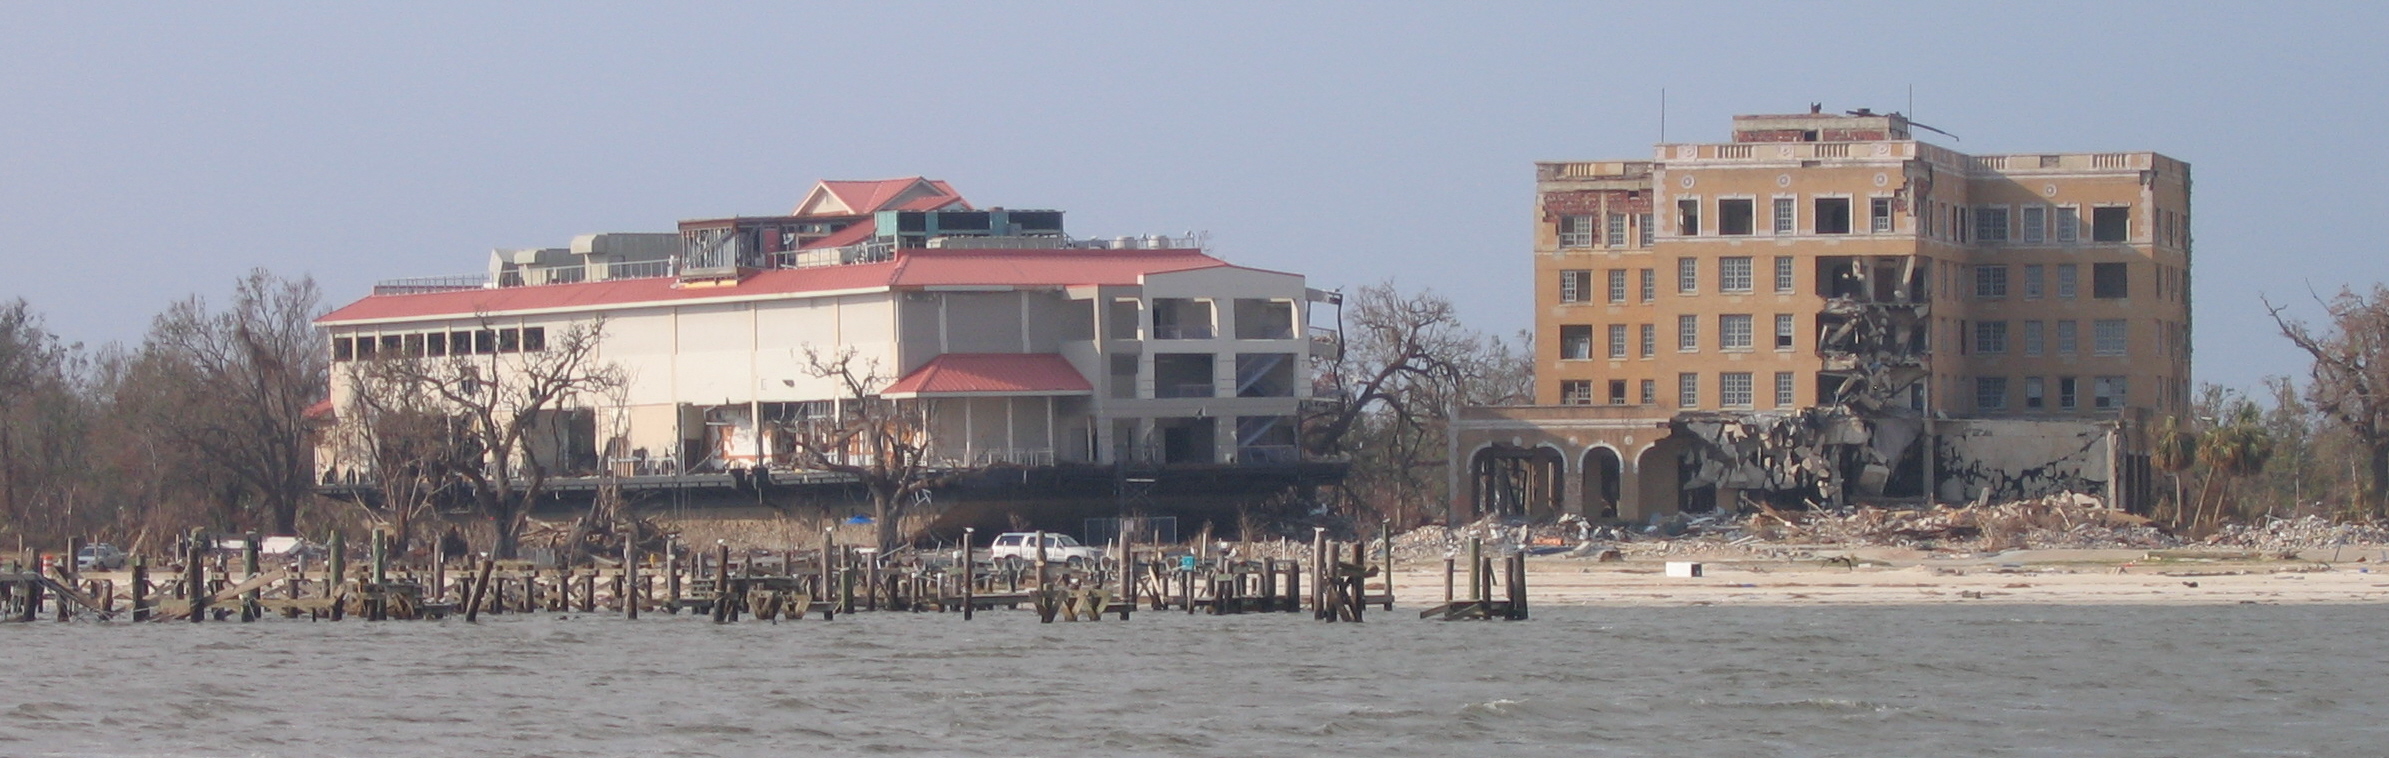 Casino barge moved inland by Hurricane Katrina in Biloxi, MS. The barge moved from the right of the picture to the left, clipping the building on the right as it passed.